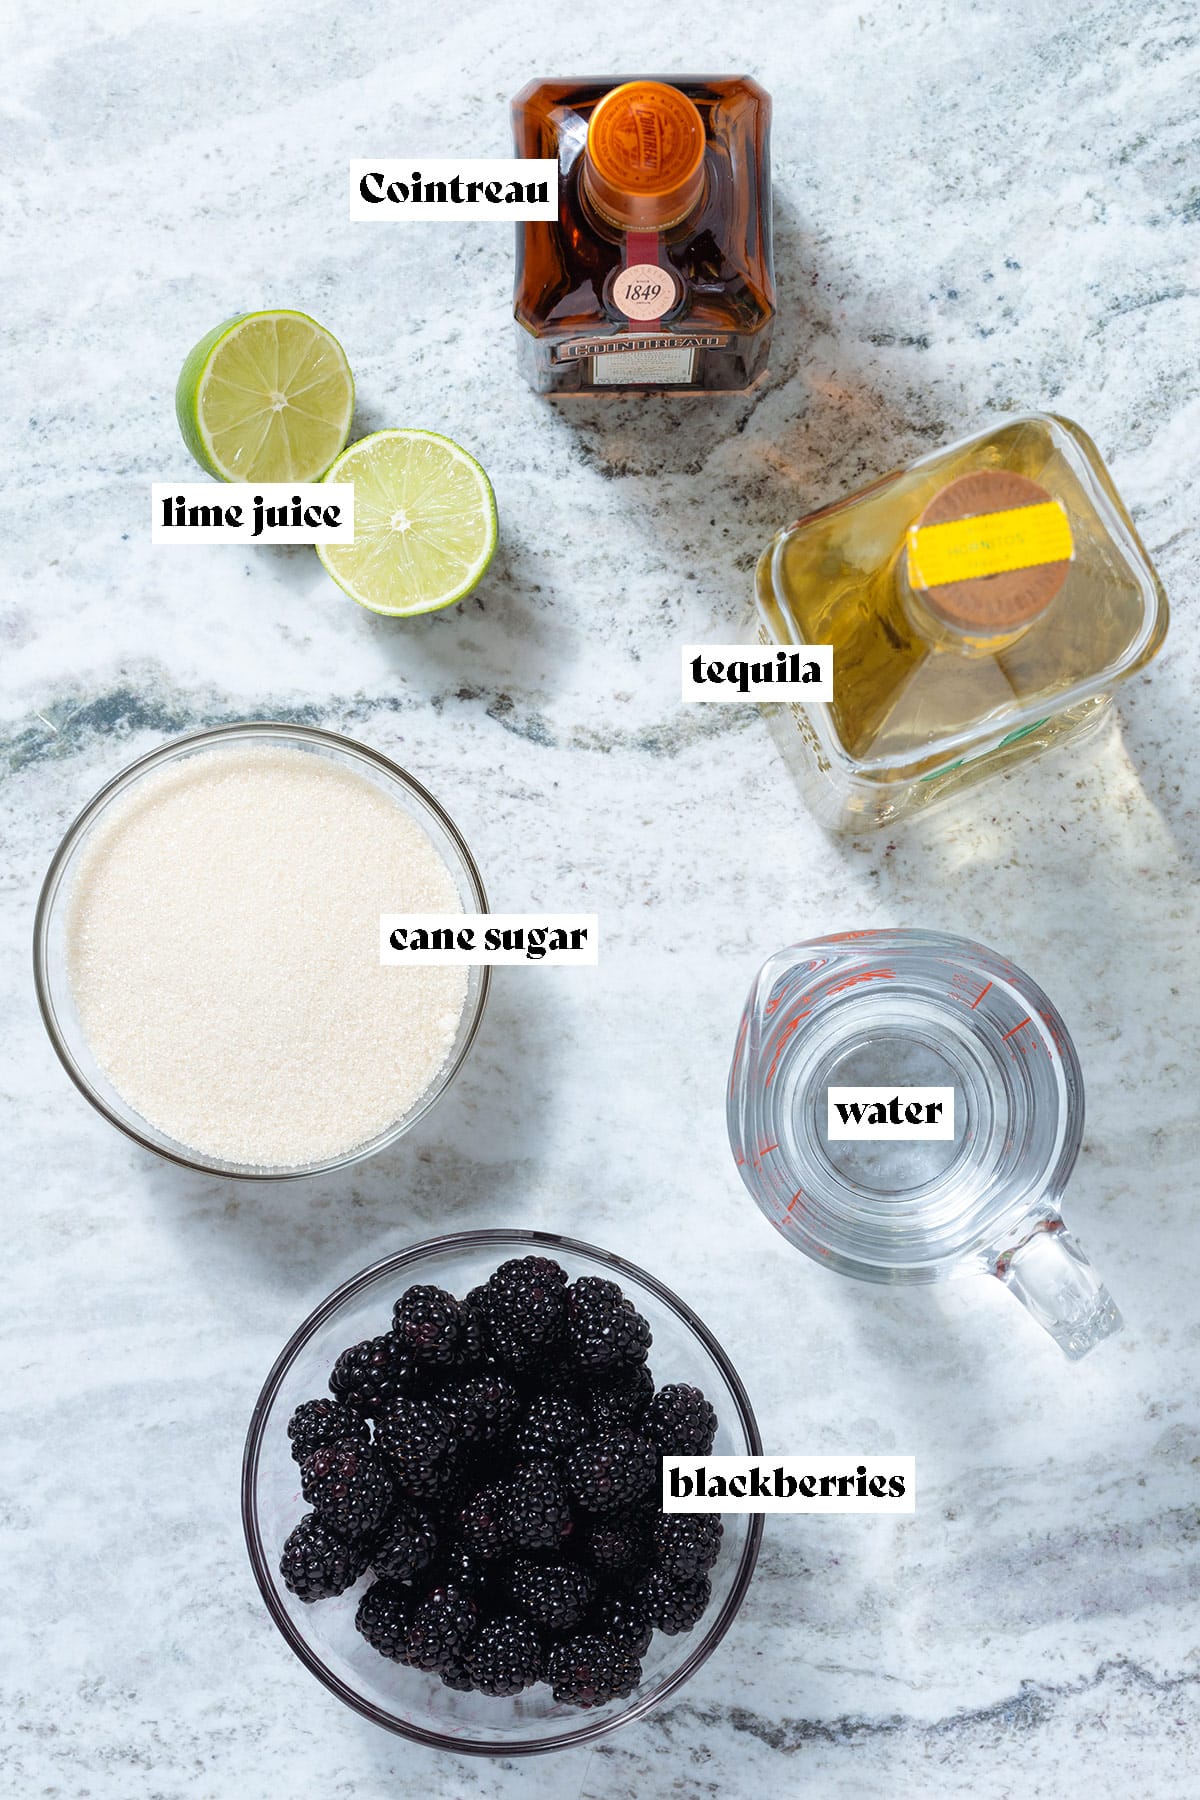 Blackberries, tequila, cane sugar, and other ingredients laid out on a grey stone background.